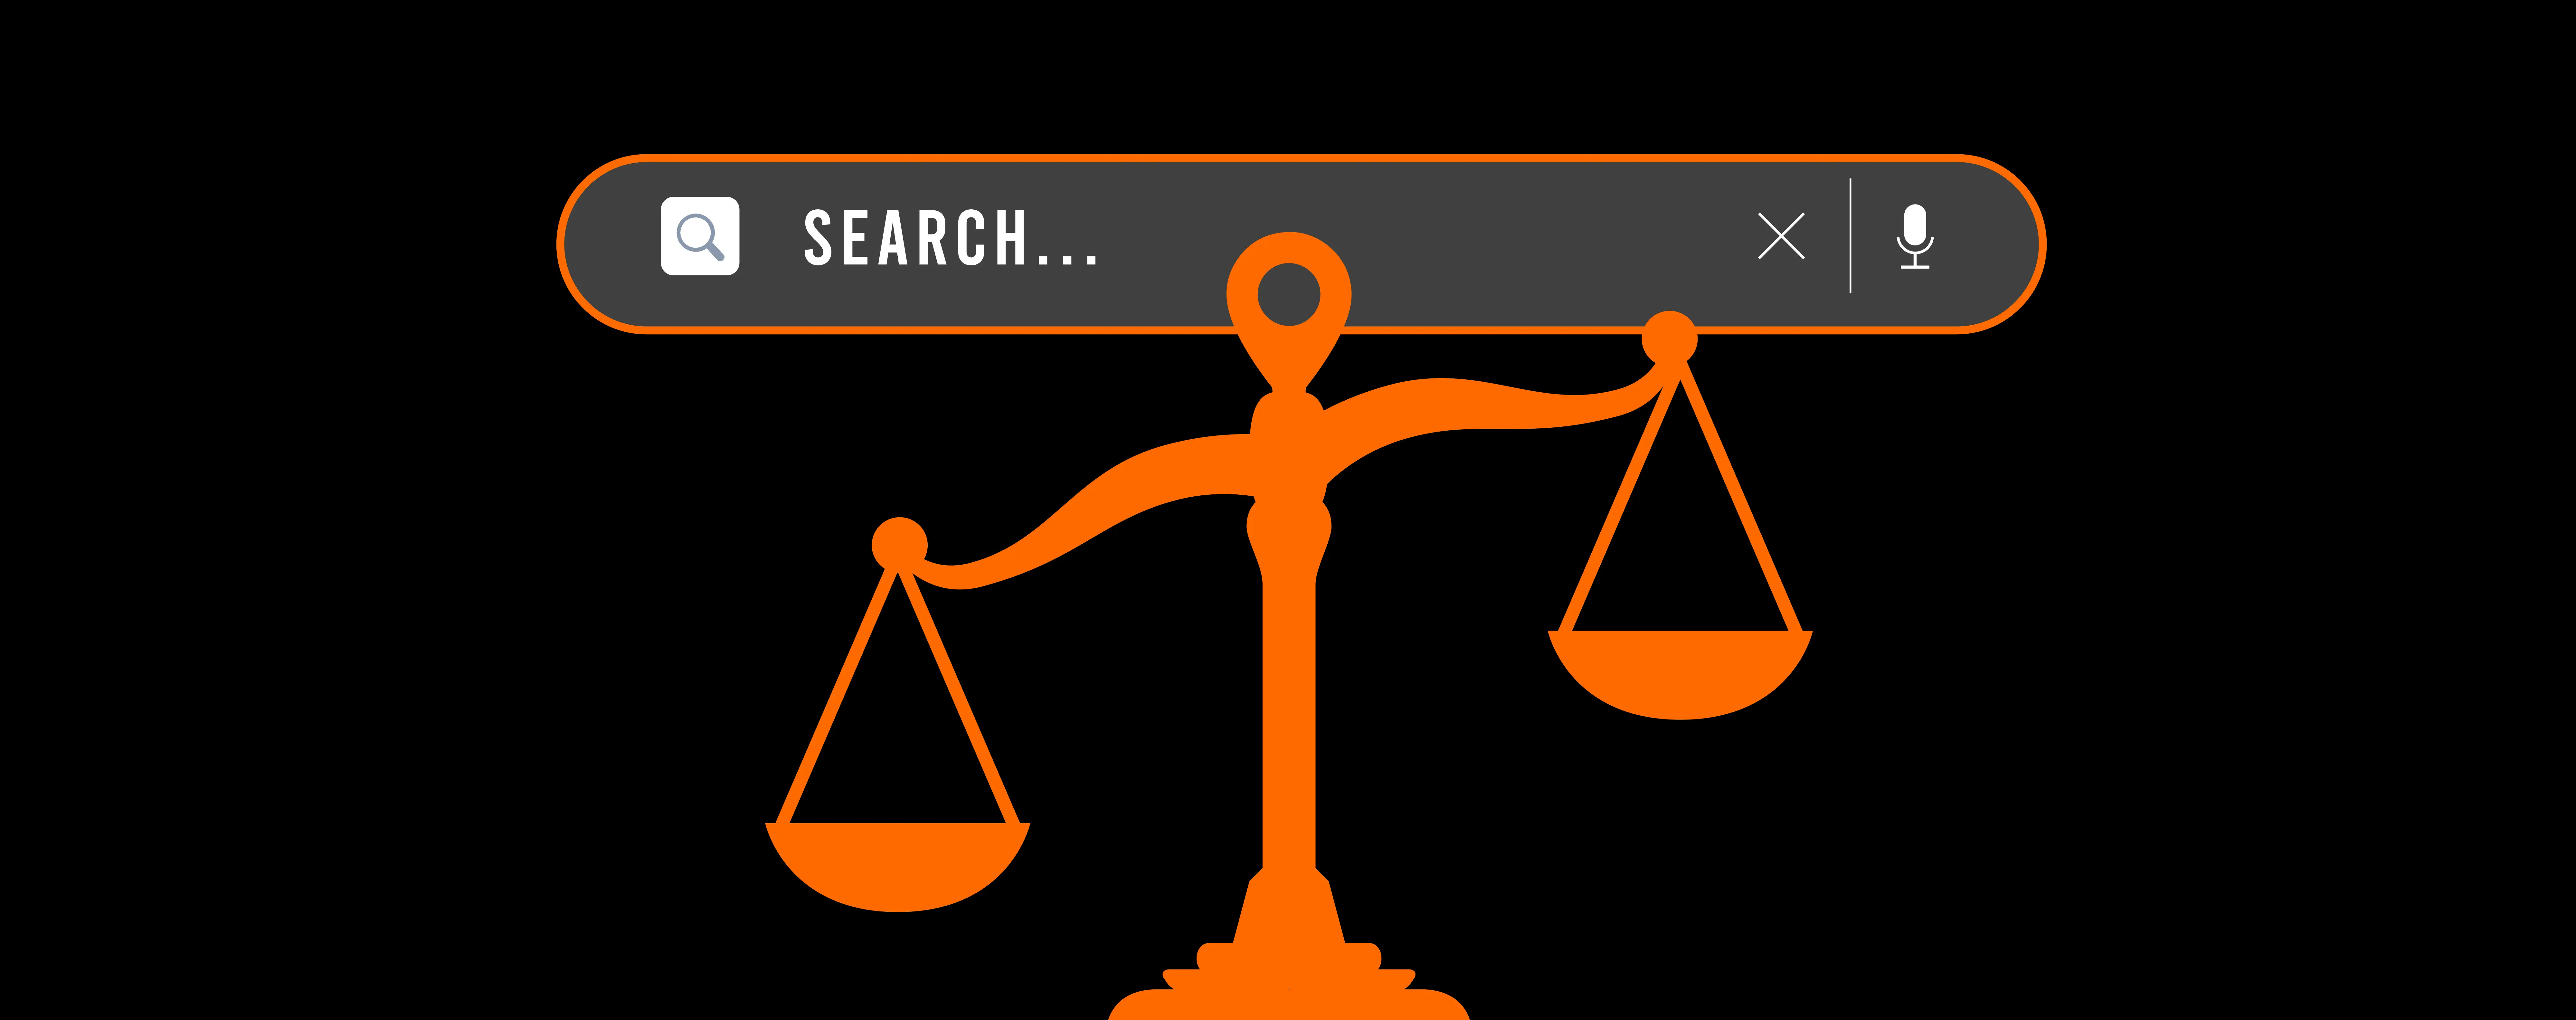 search bar with law symbol